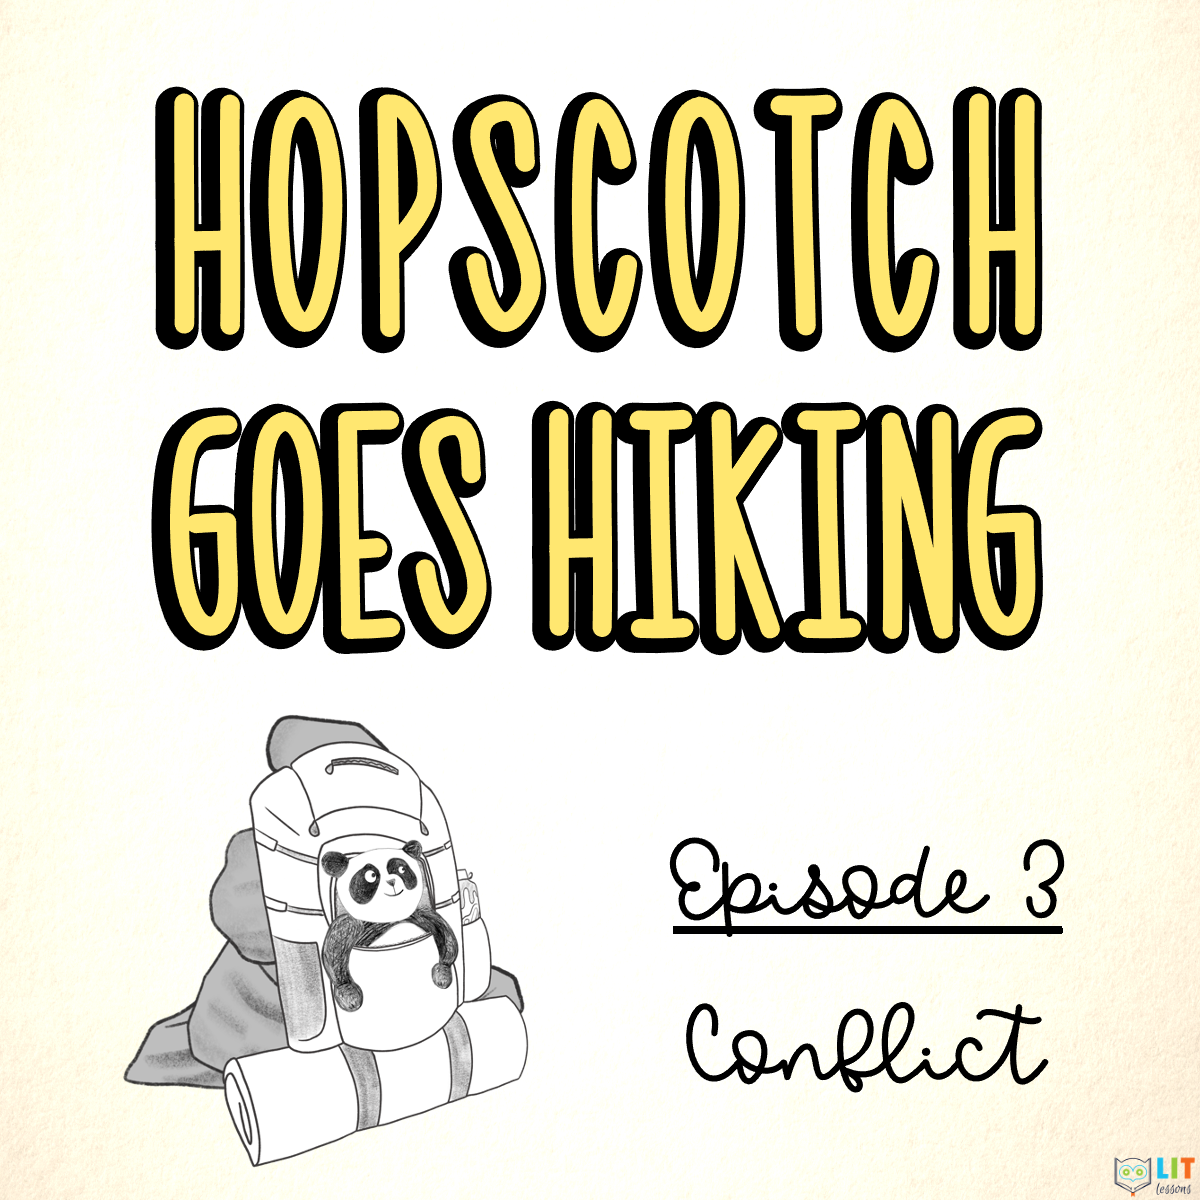 Hopscotch Goes Hiking - Conflict